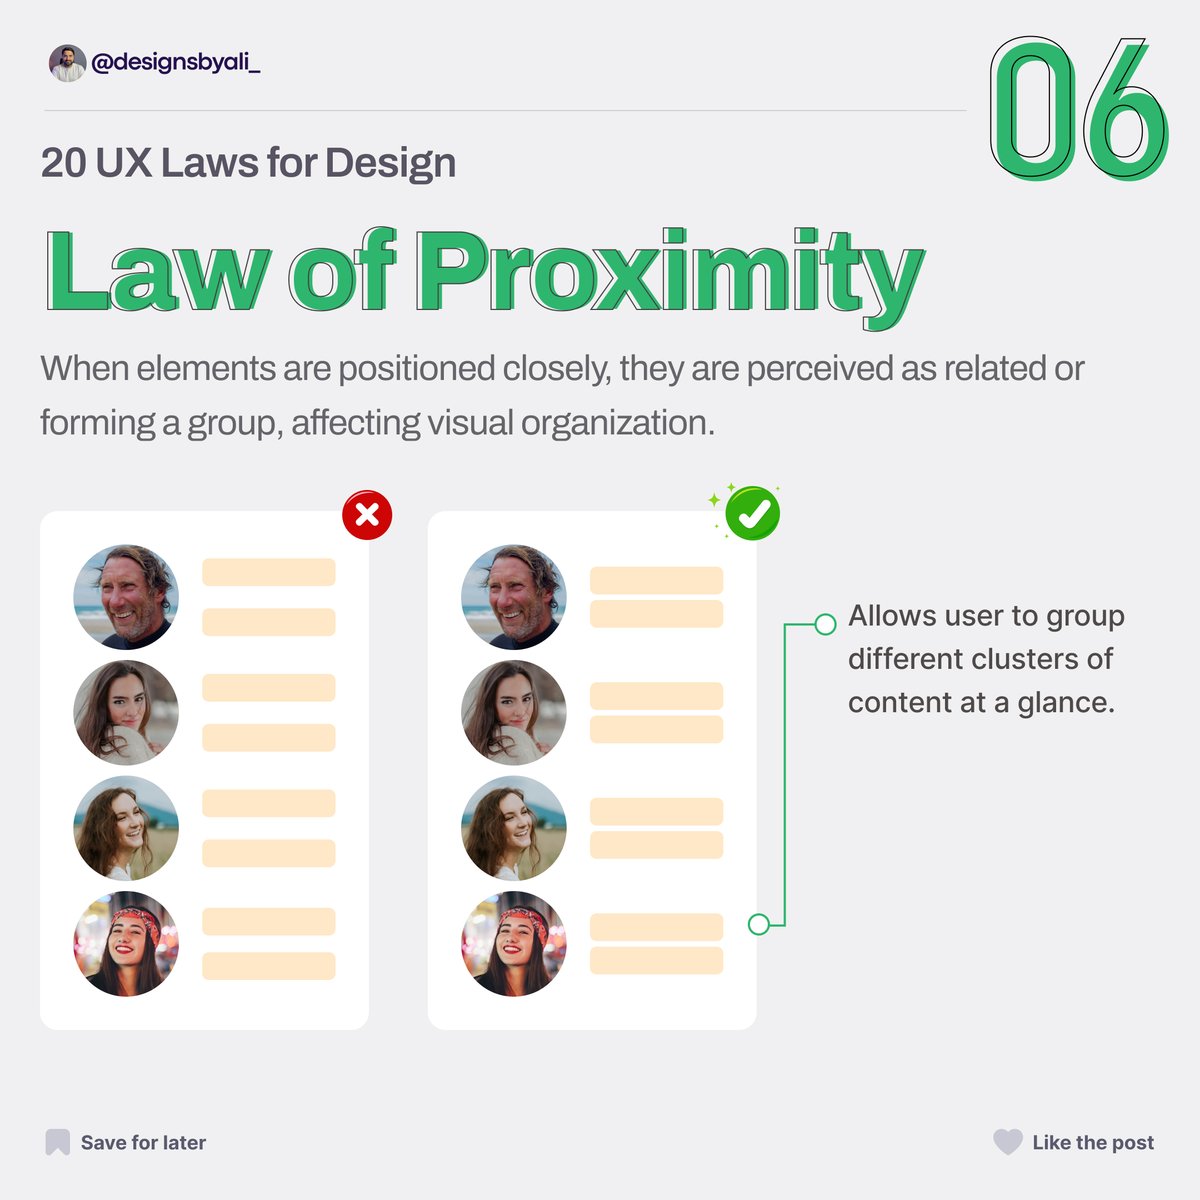 Top UX Laws: Law of Proximity 📏
When elements are positioned closely, they are perceived as related or forming a group, affecting visual organization. 🖼️

#LawOfProximity #DesignPrinciples #VisualDesign #Organization #Grouping #designsbyali #uidesigner #uiux #uxlaws